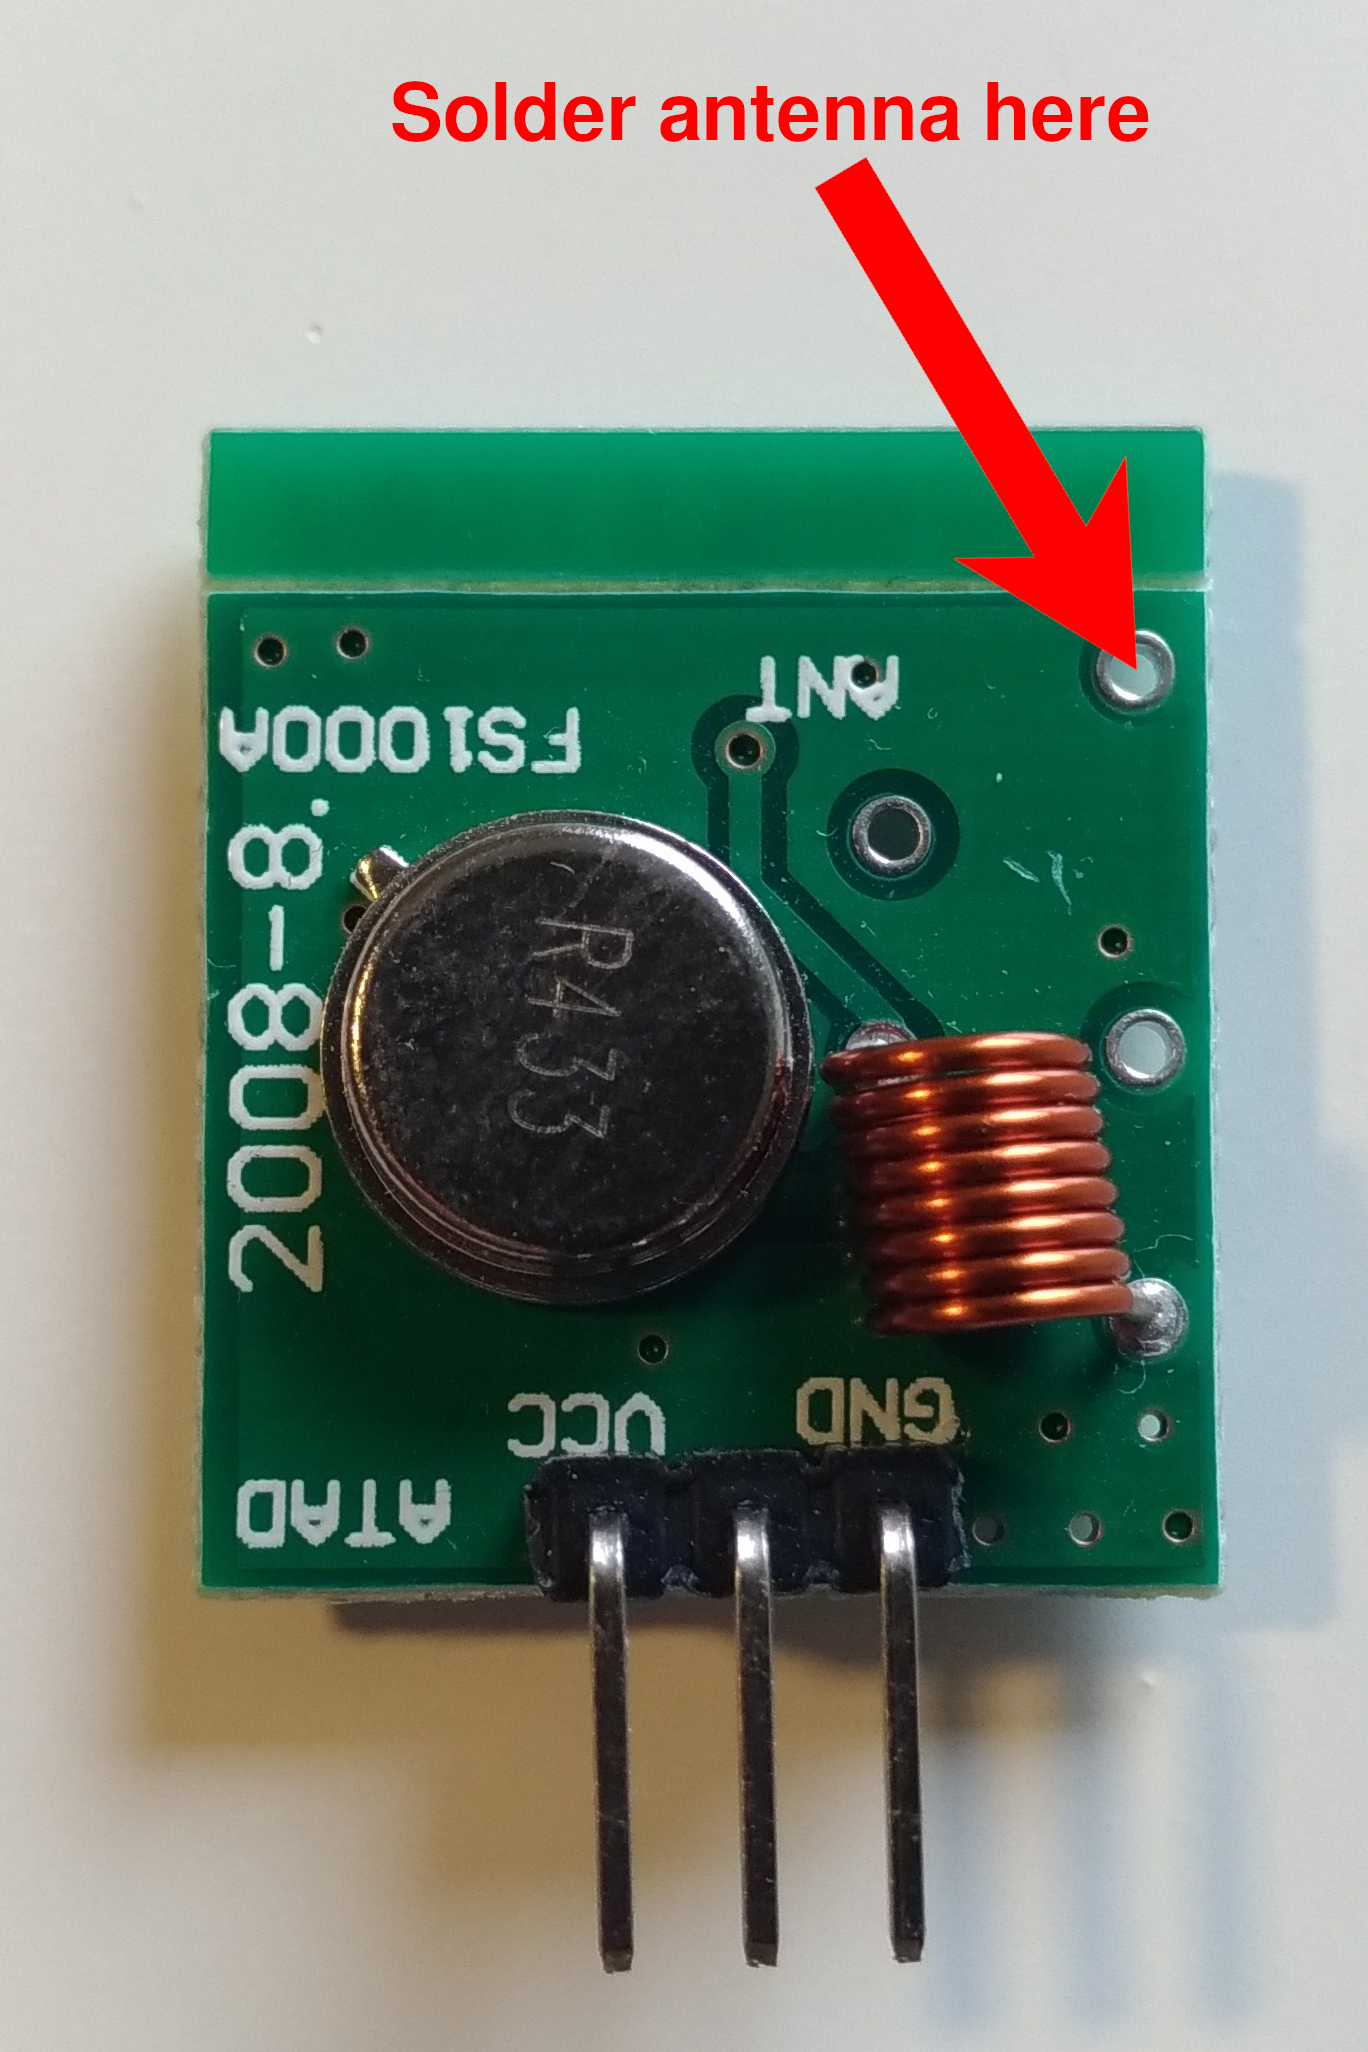 Where to solder the antenna to the transmitter module